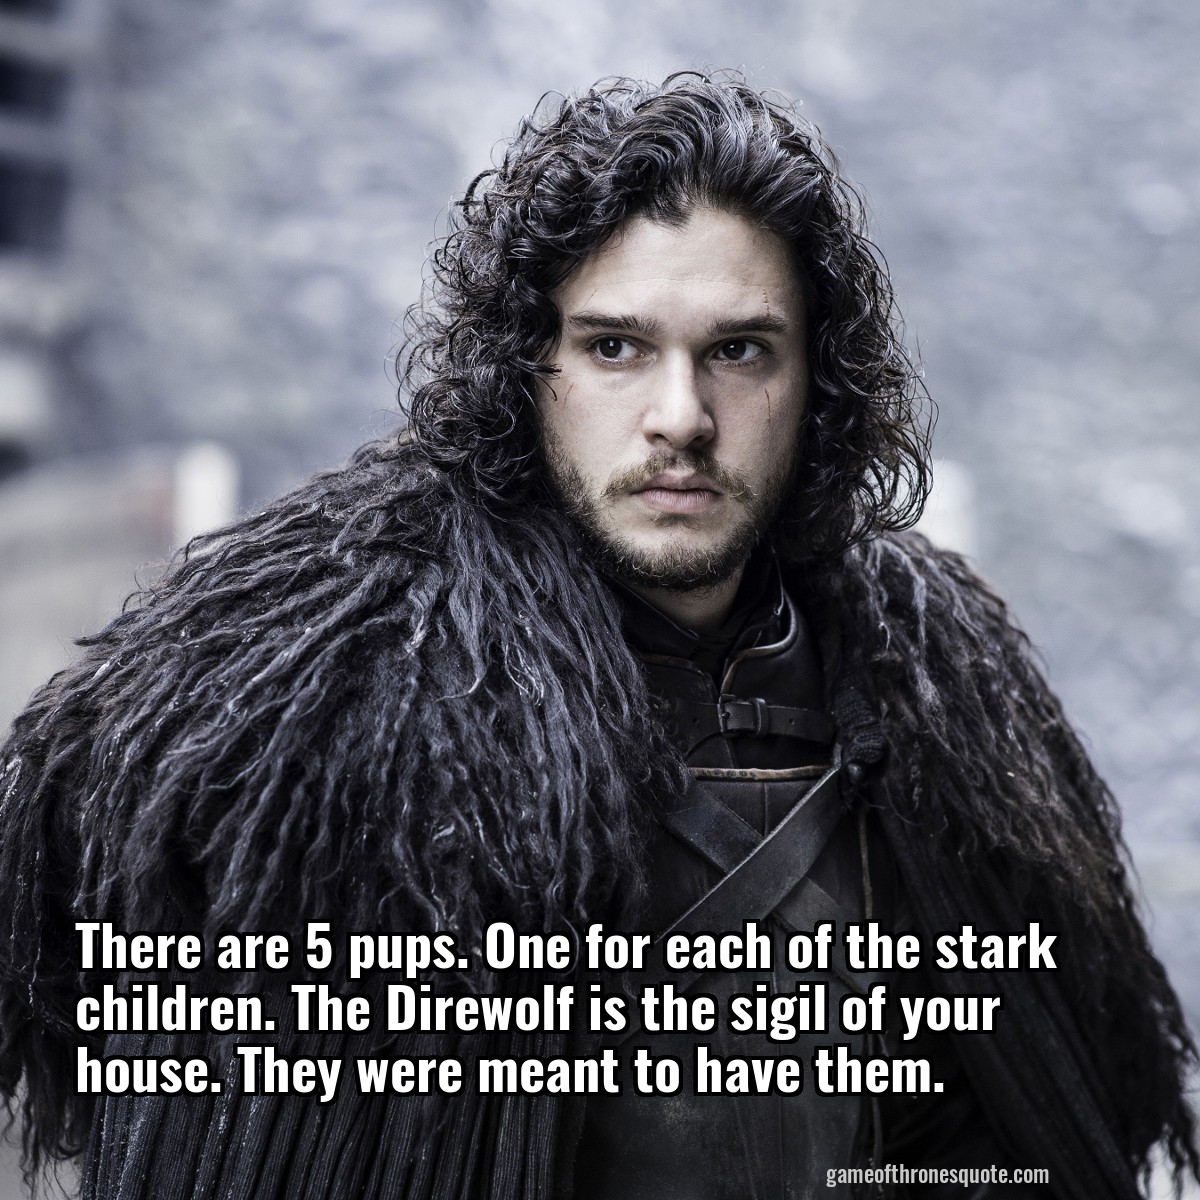 There are 5 pups. One for each of the stark children. The Direwolf is the sigil of your house. They were meant to have them.